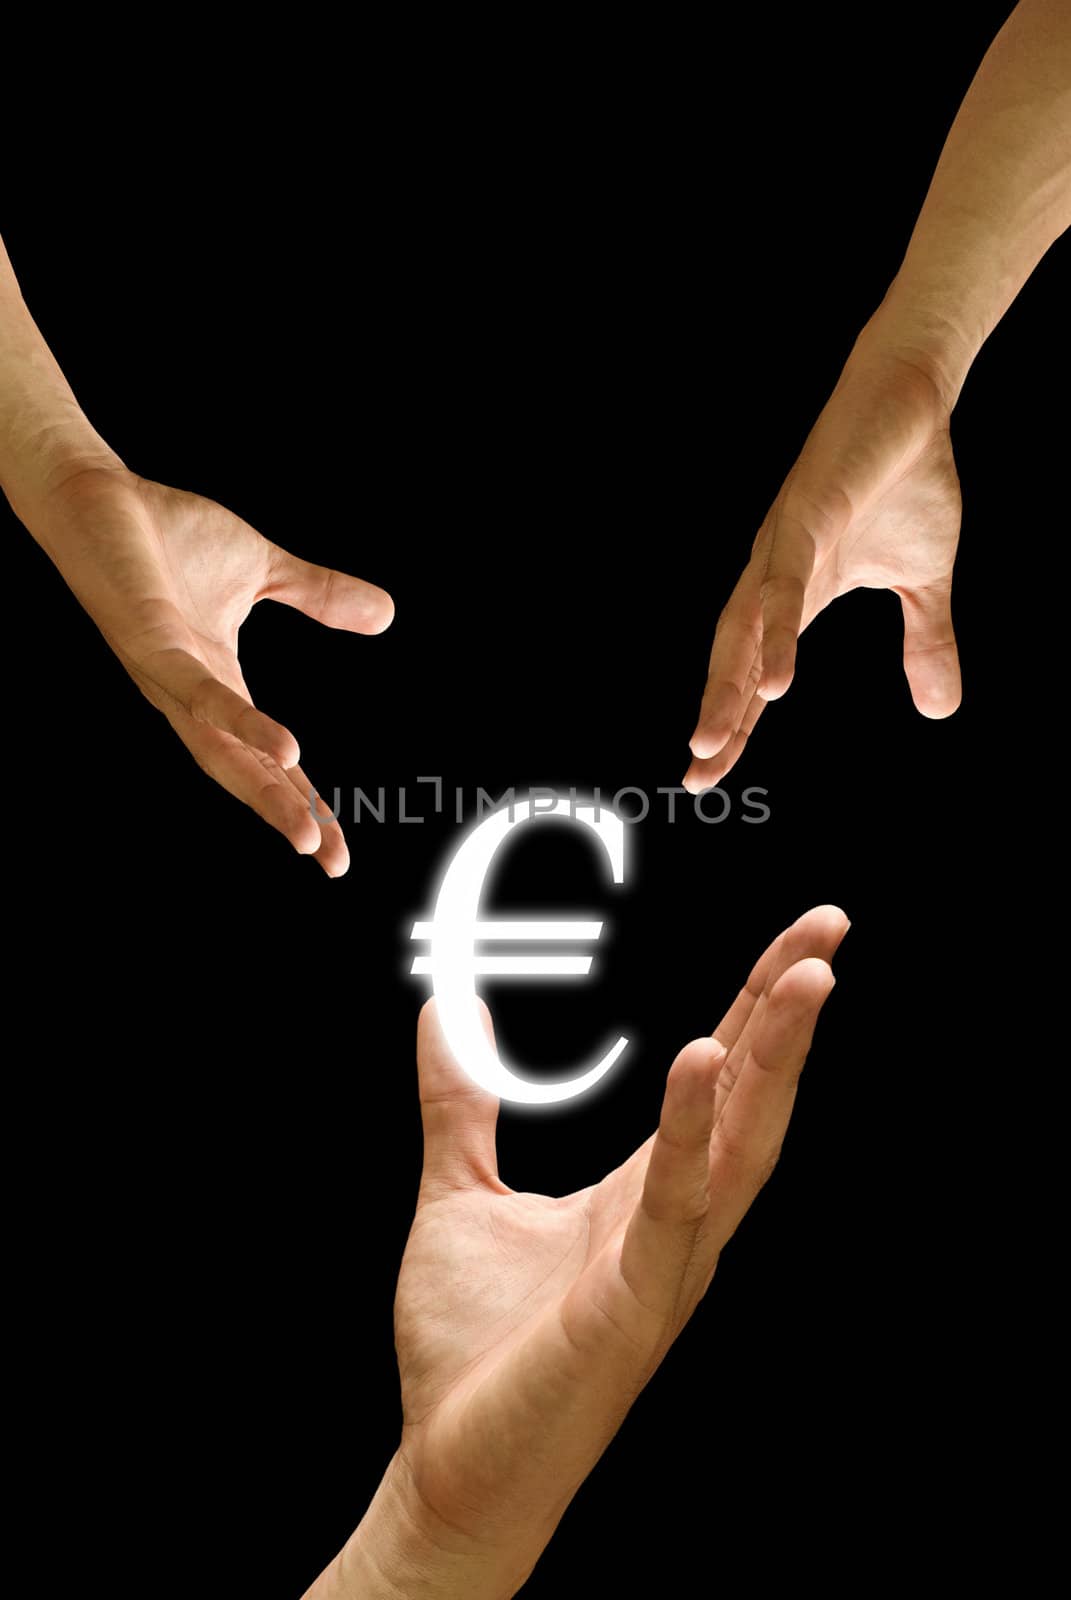 Big hand to share Euro icon, concept by pixbox77